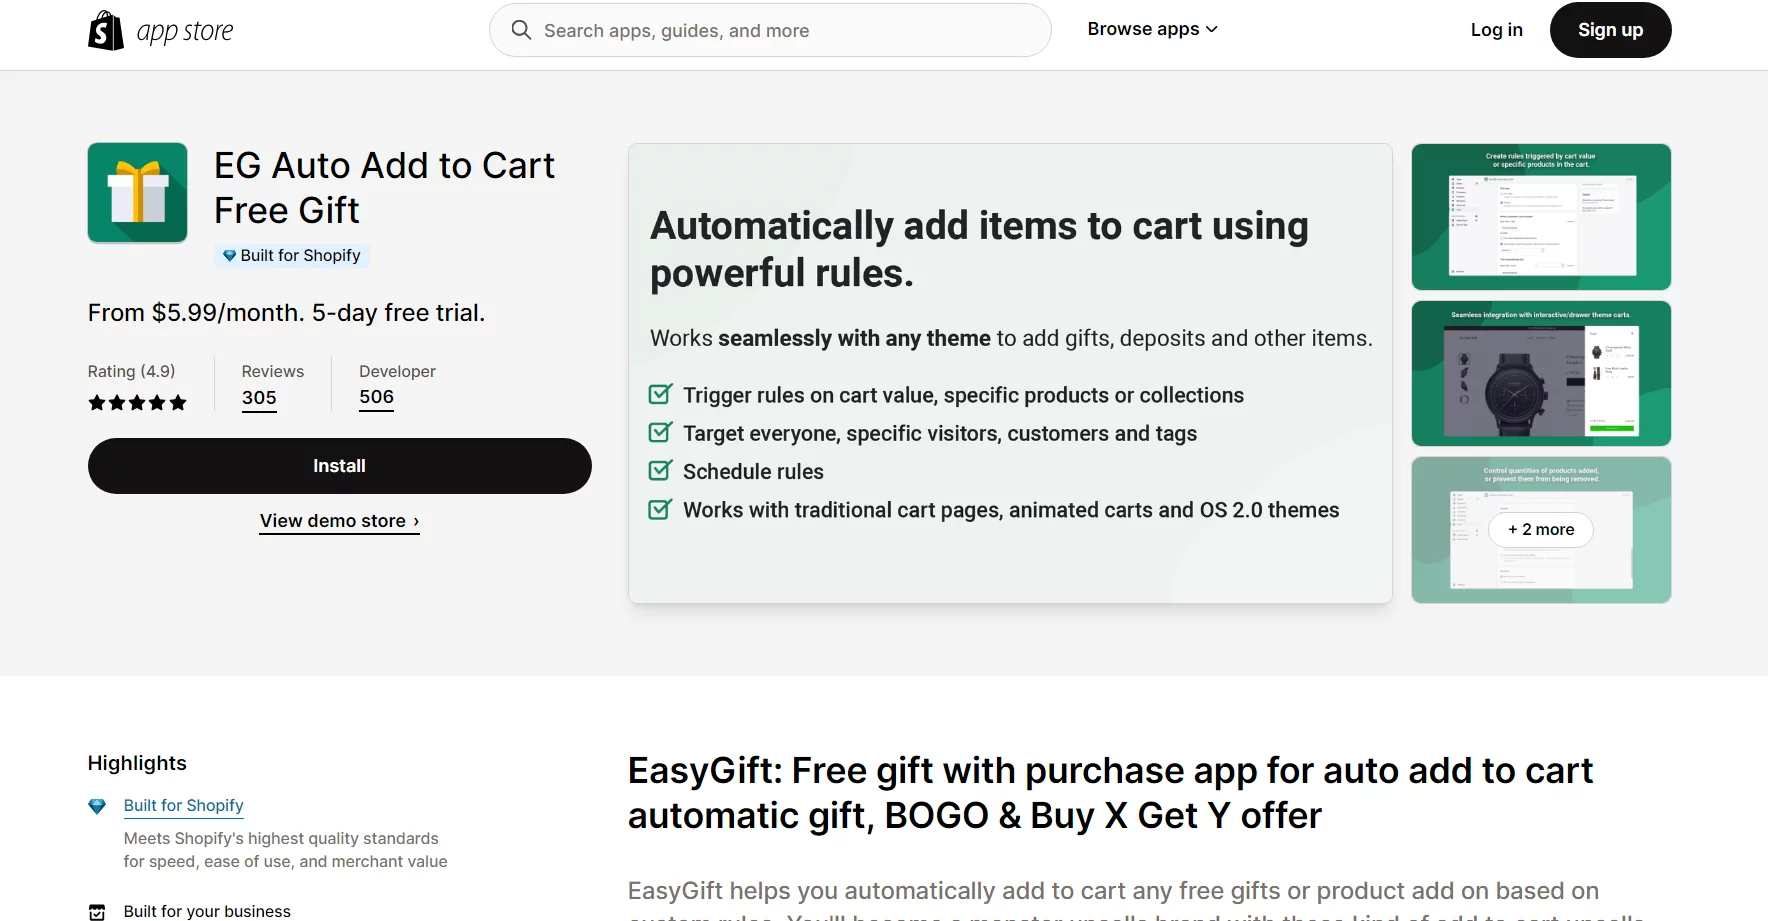 Best Free SEO Apps for Shopify: EG Auto Add to Cart Free Gift